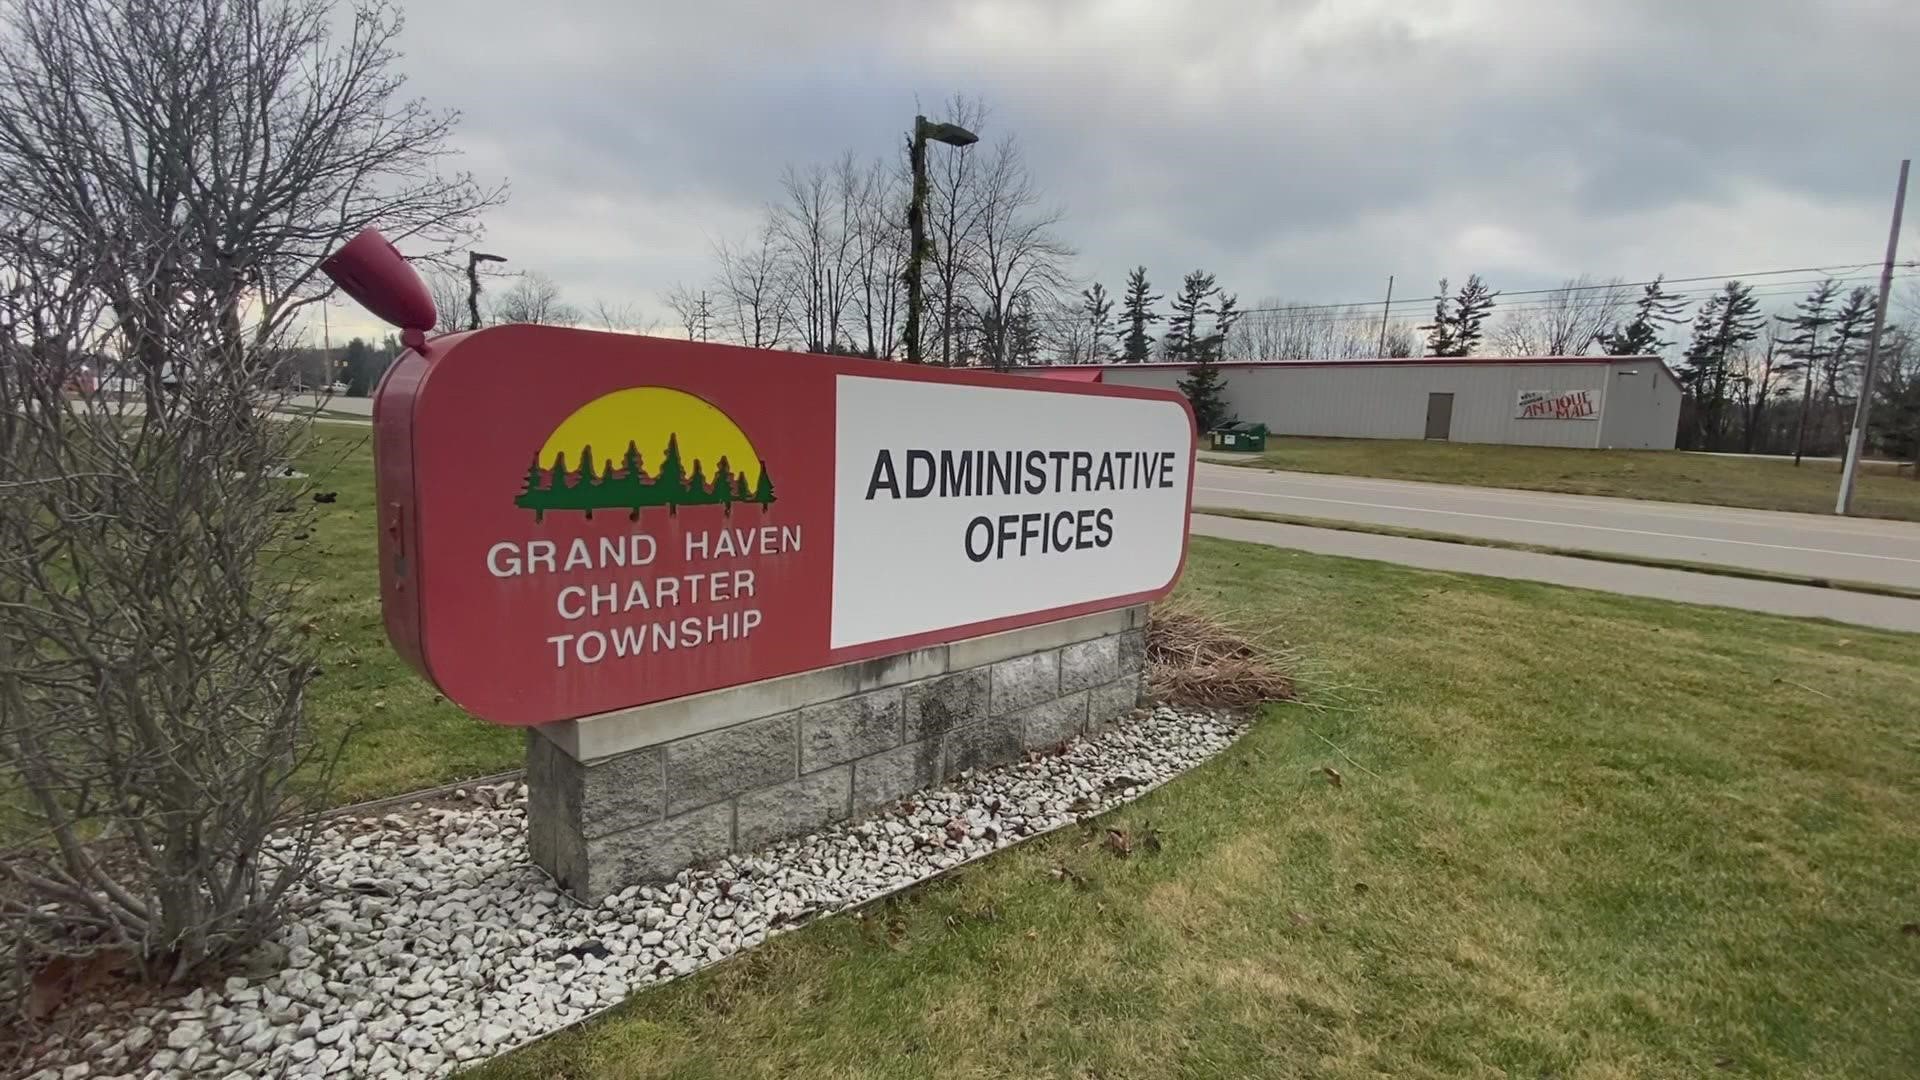 Grand Haven Municipal Township is fighting the bill that could get rid of local municipalities right to regulate them.